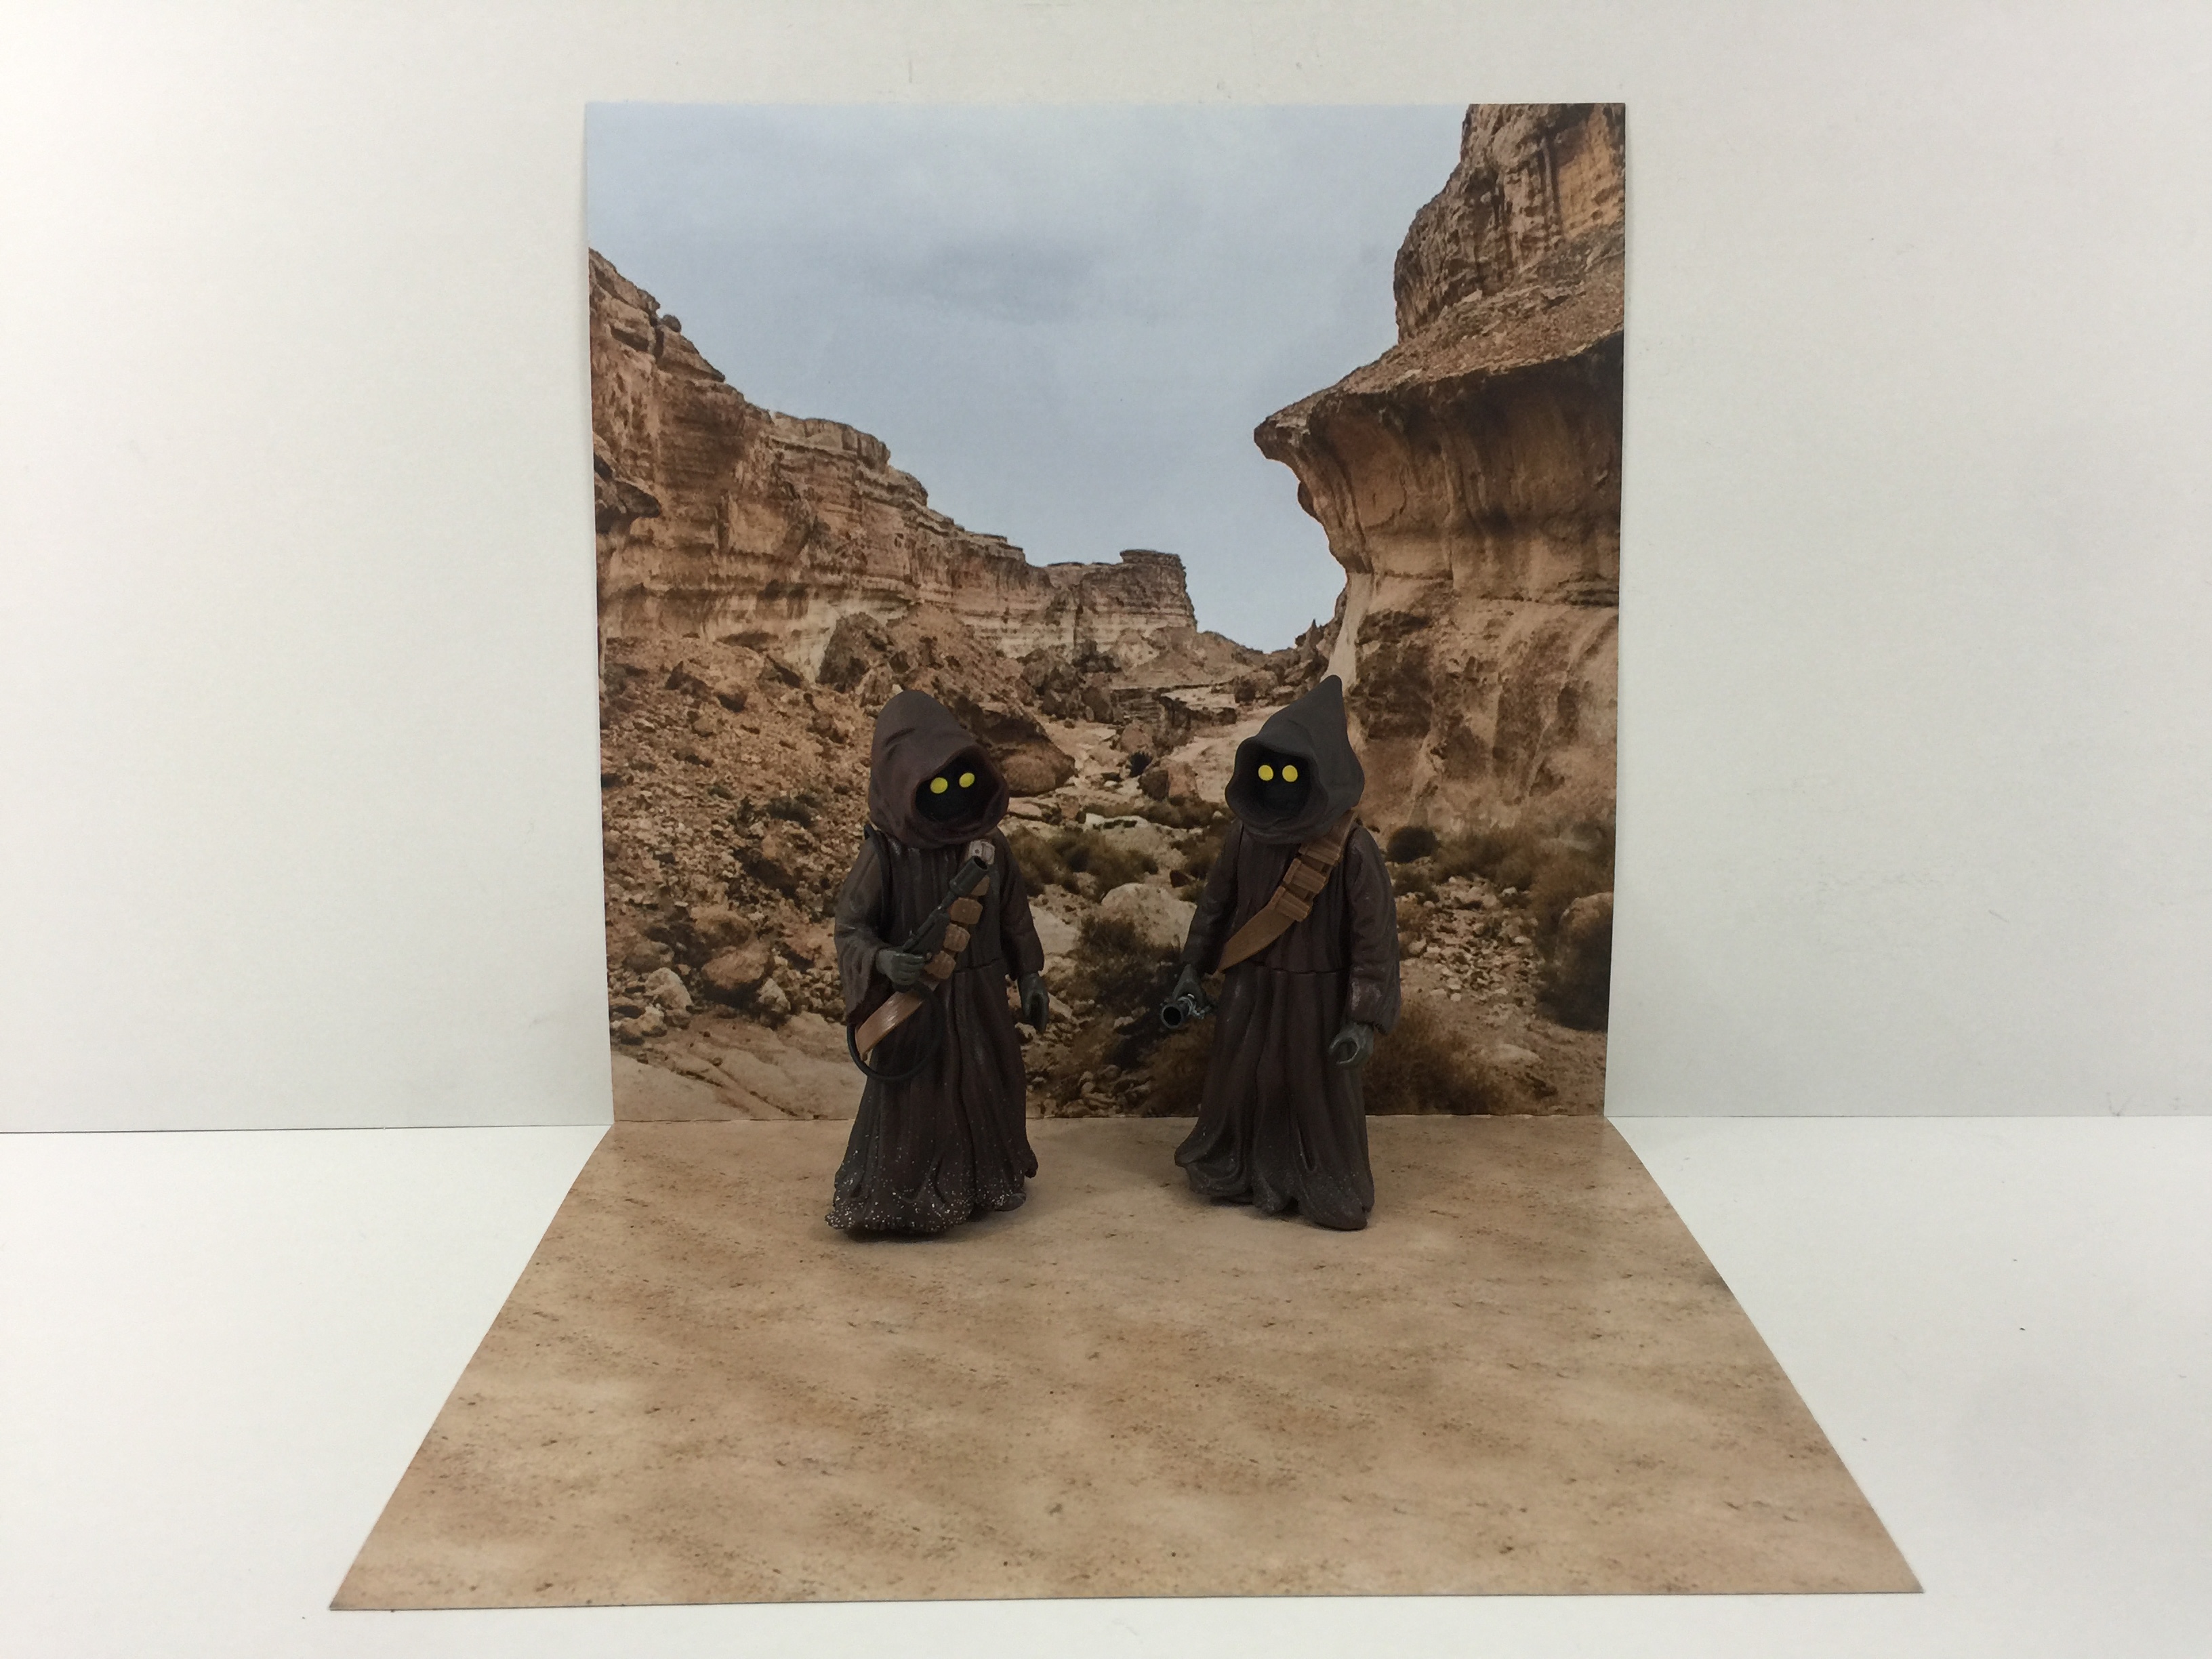 Vintage Star Wars Tatooine Desert Custom Backdrop Display Diorama For Ikea Detolf Display Cabinet Replicator Boxes And Inserts